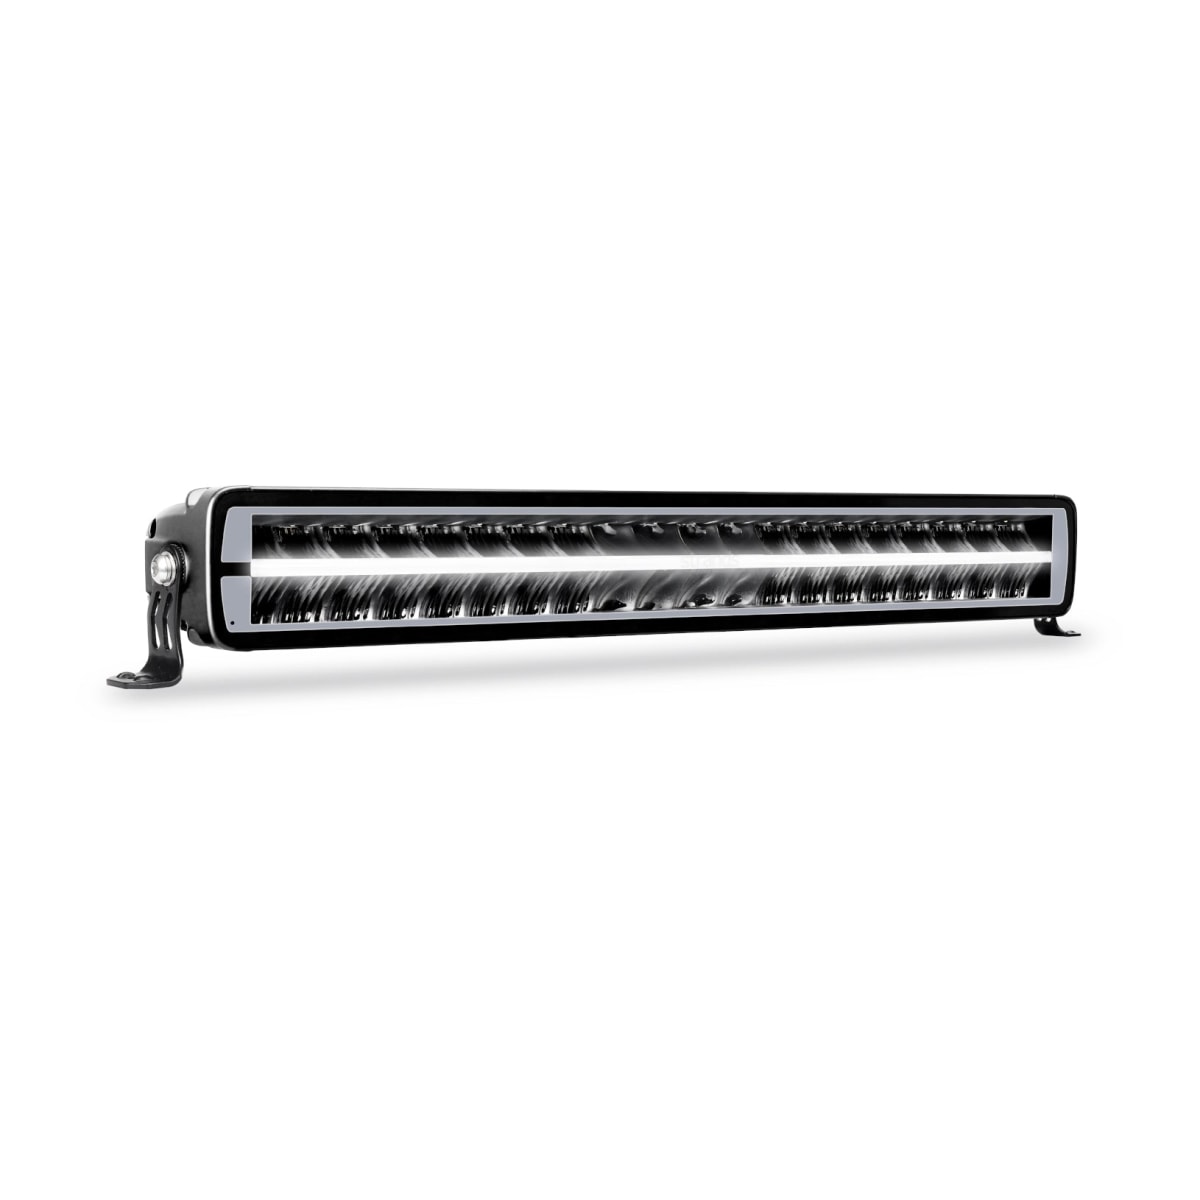 Strands SIBERIA DRH LED BAR 22″ – WITH HEATED LENS